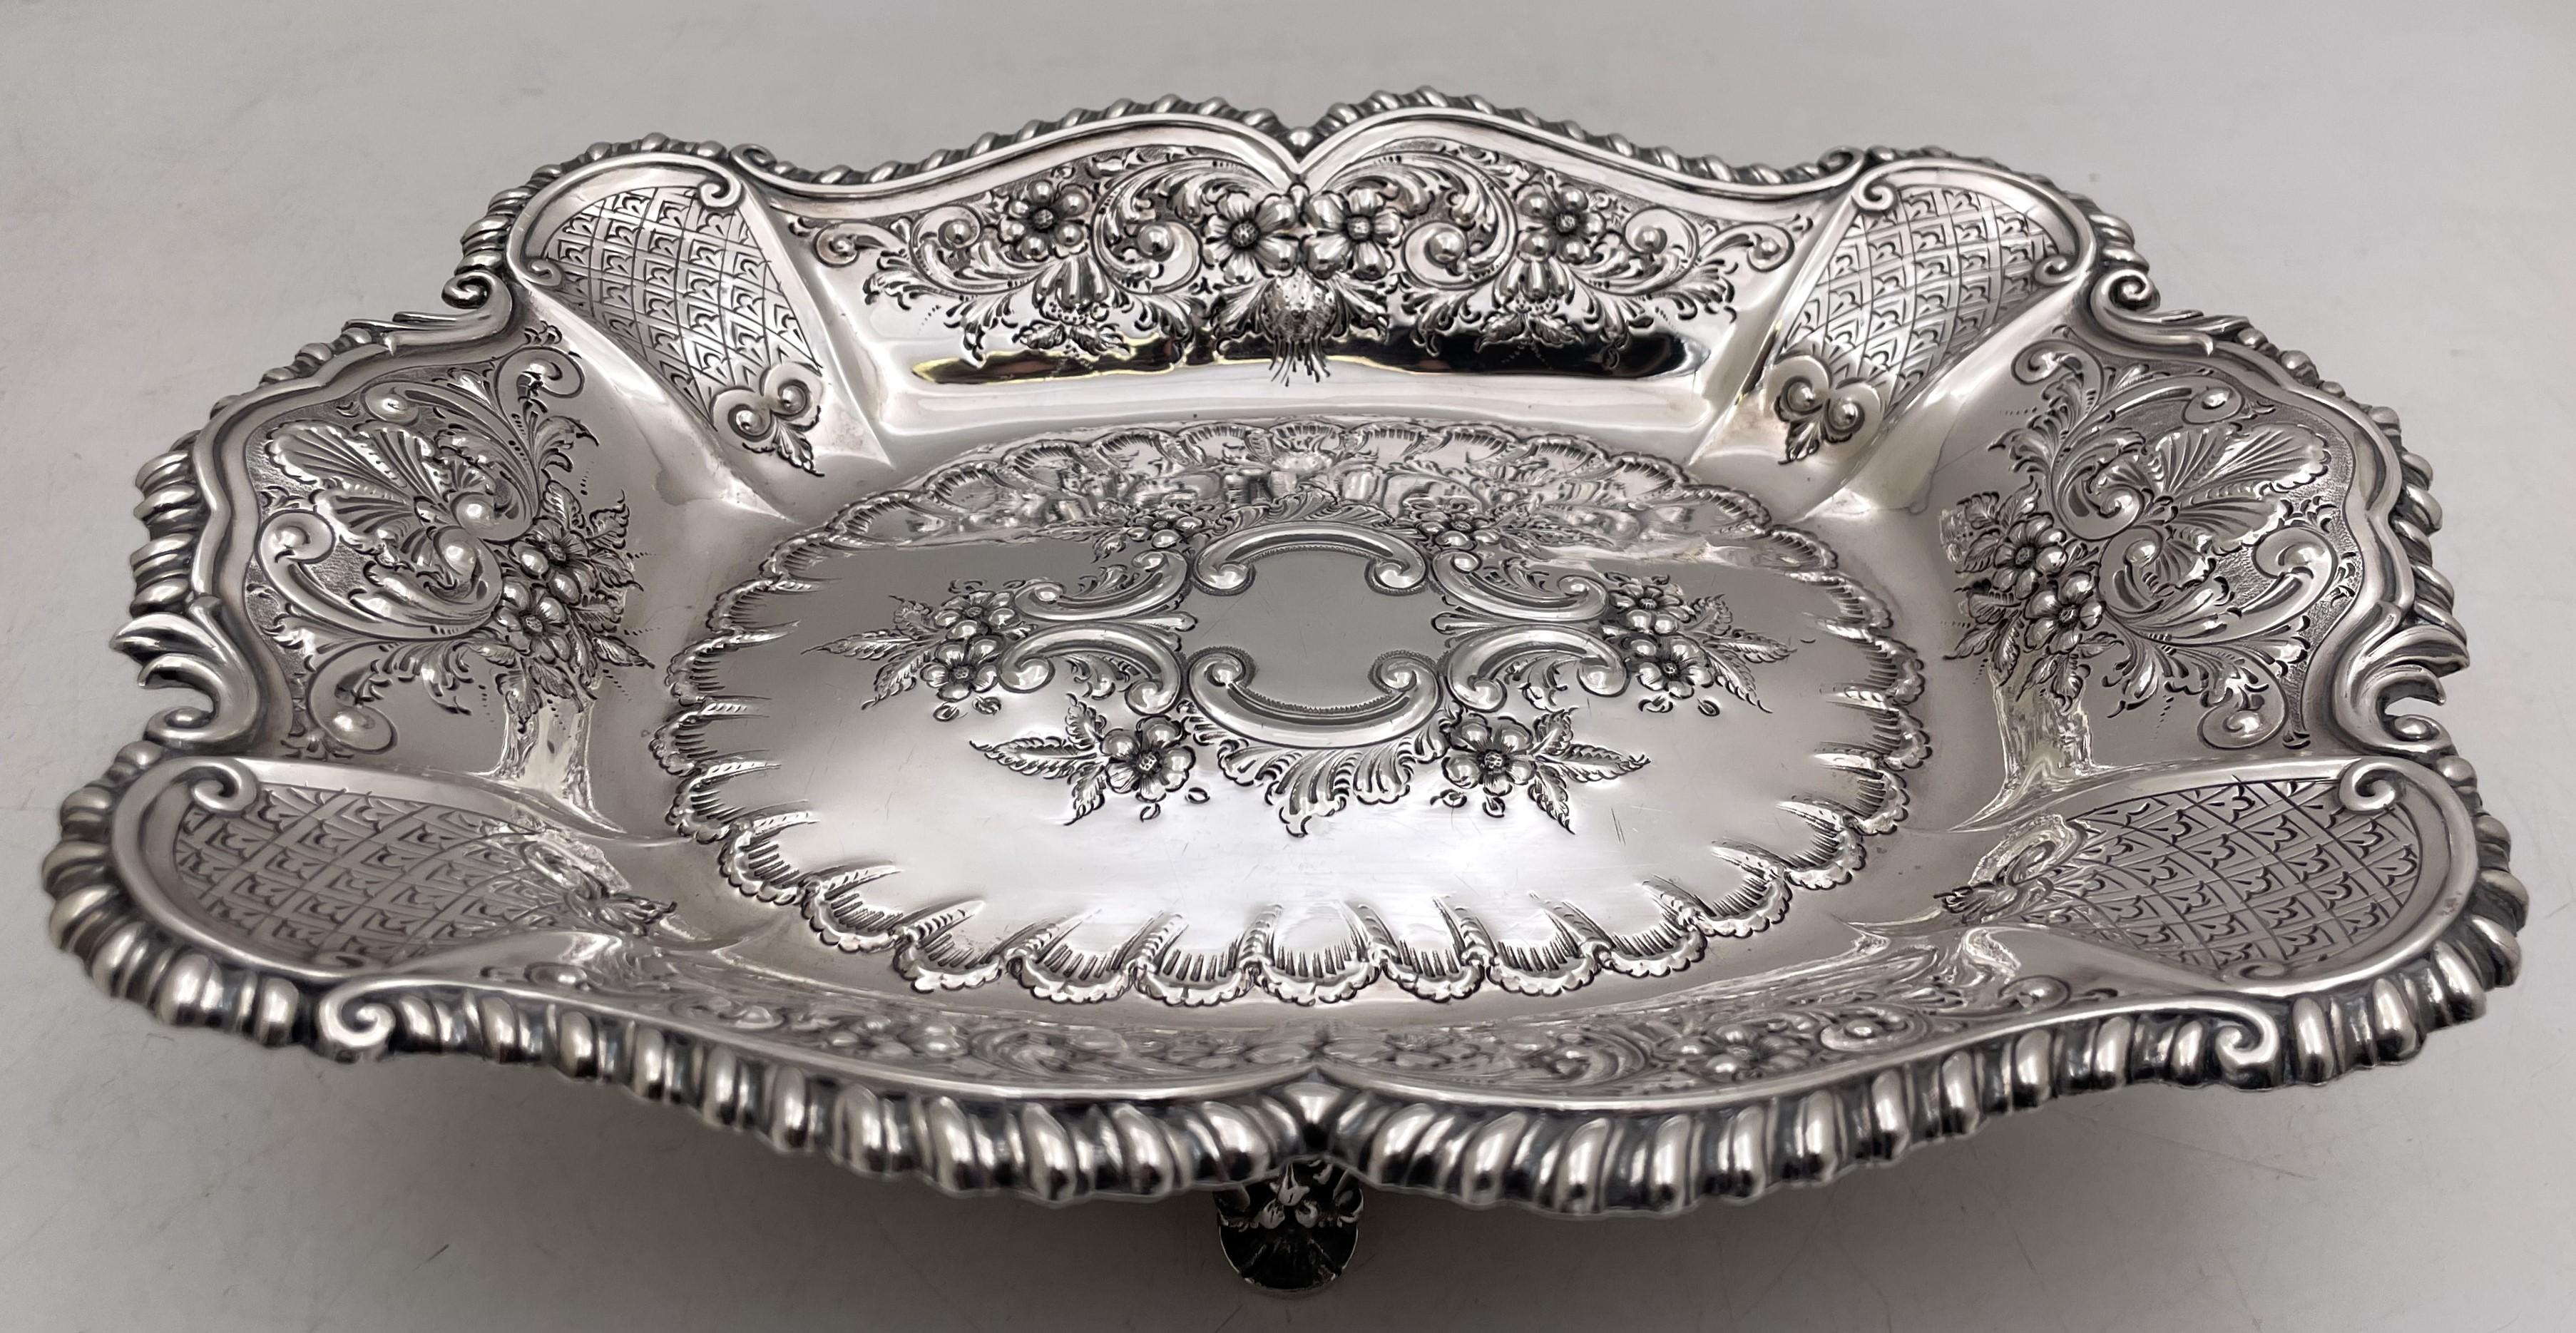 Lee & Wigfull sterling silver bread dish or basket, made in Sheffield, England in 1902 (Edwardian era), beautifully adorned with raised floral and natural motifs, standing on 4 feet. It measures 11 1/8'' in length by 8 3/4'' in width by 2 7/8'' in